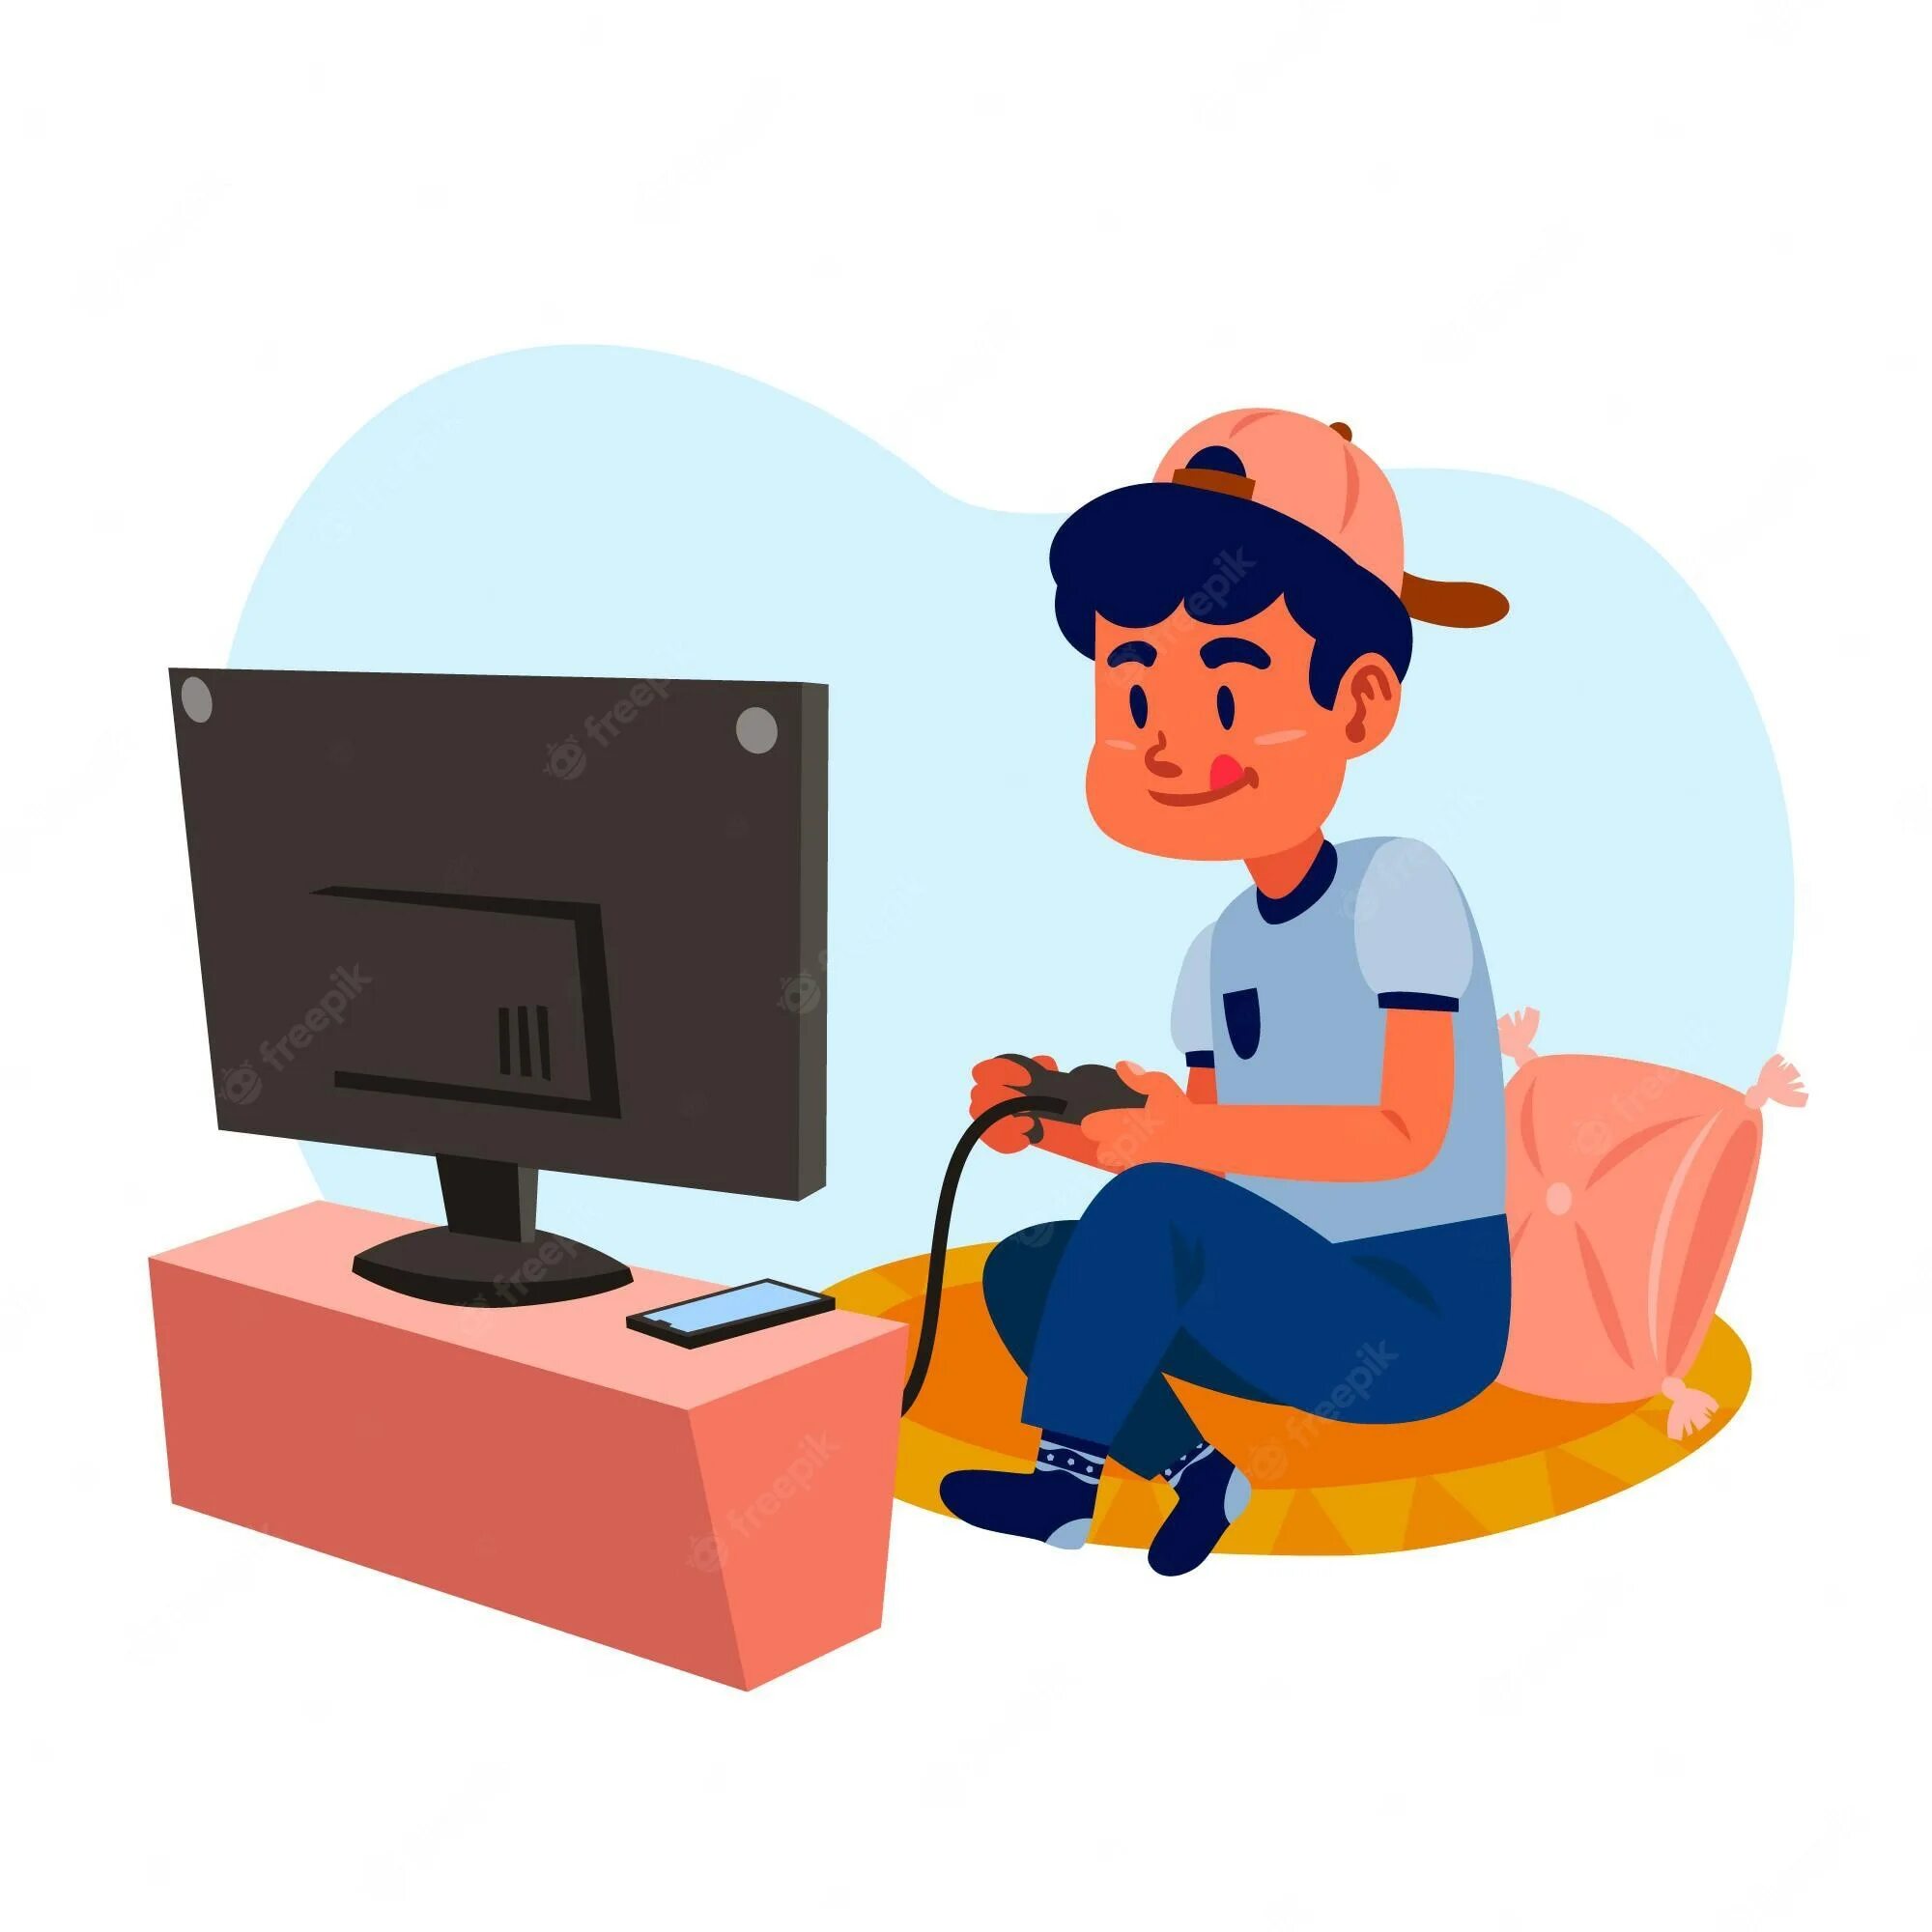 He playing computer games. Игры гиф вектор. Play Video games картинка для детей vector stock. Playing Video games illustration. Don't Play Video games, please! Clipart.